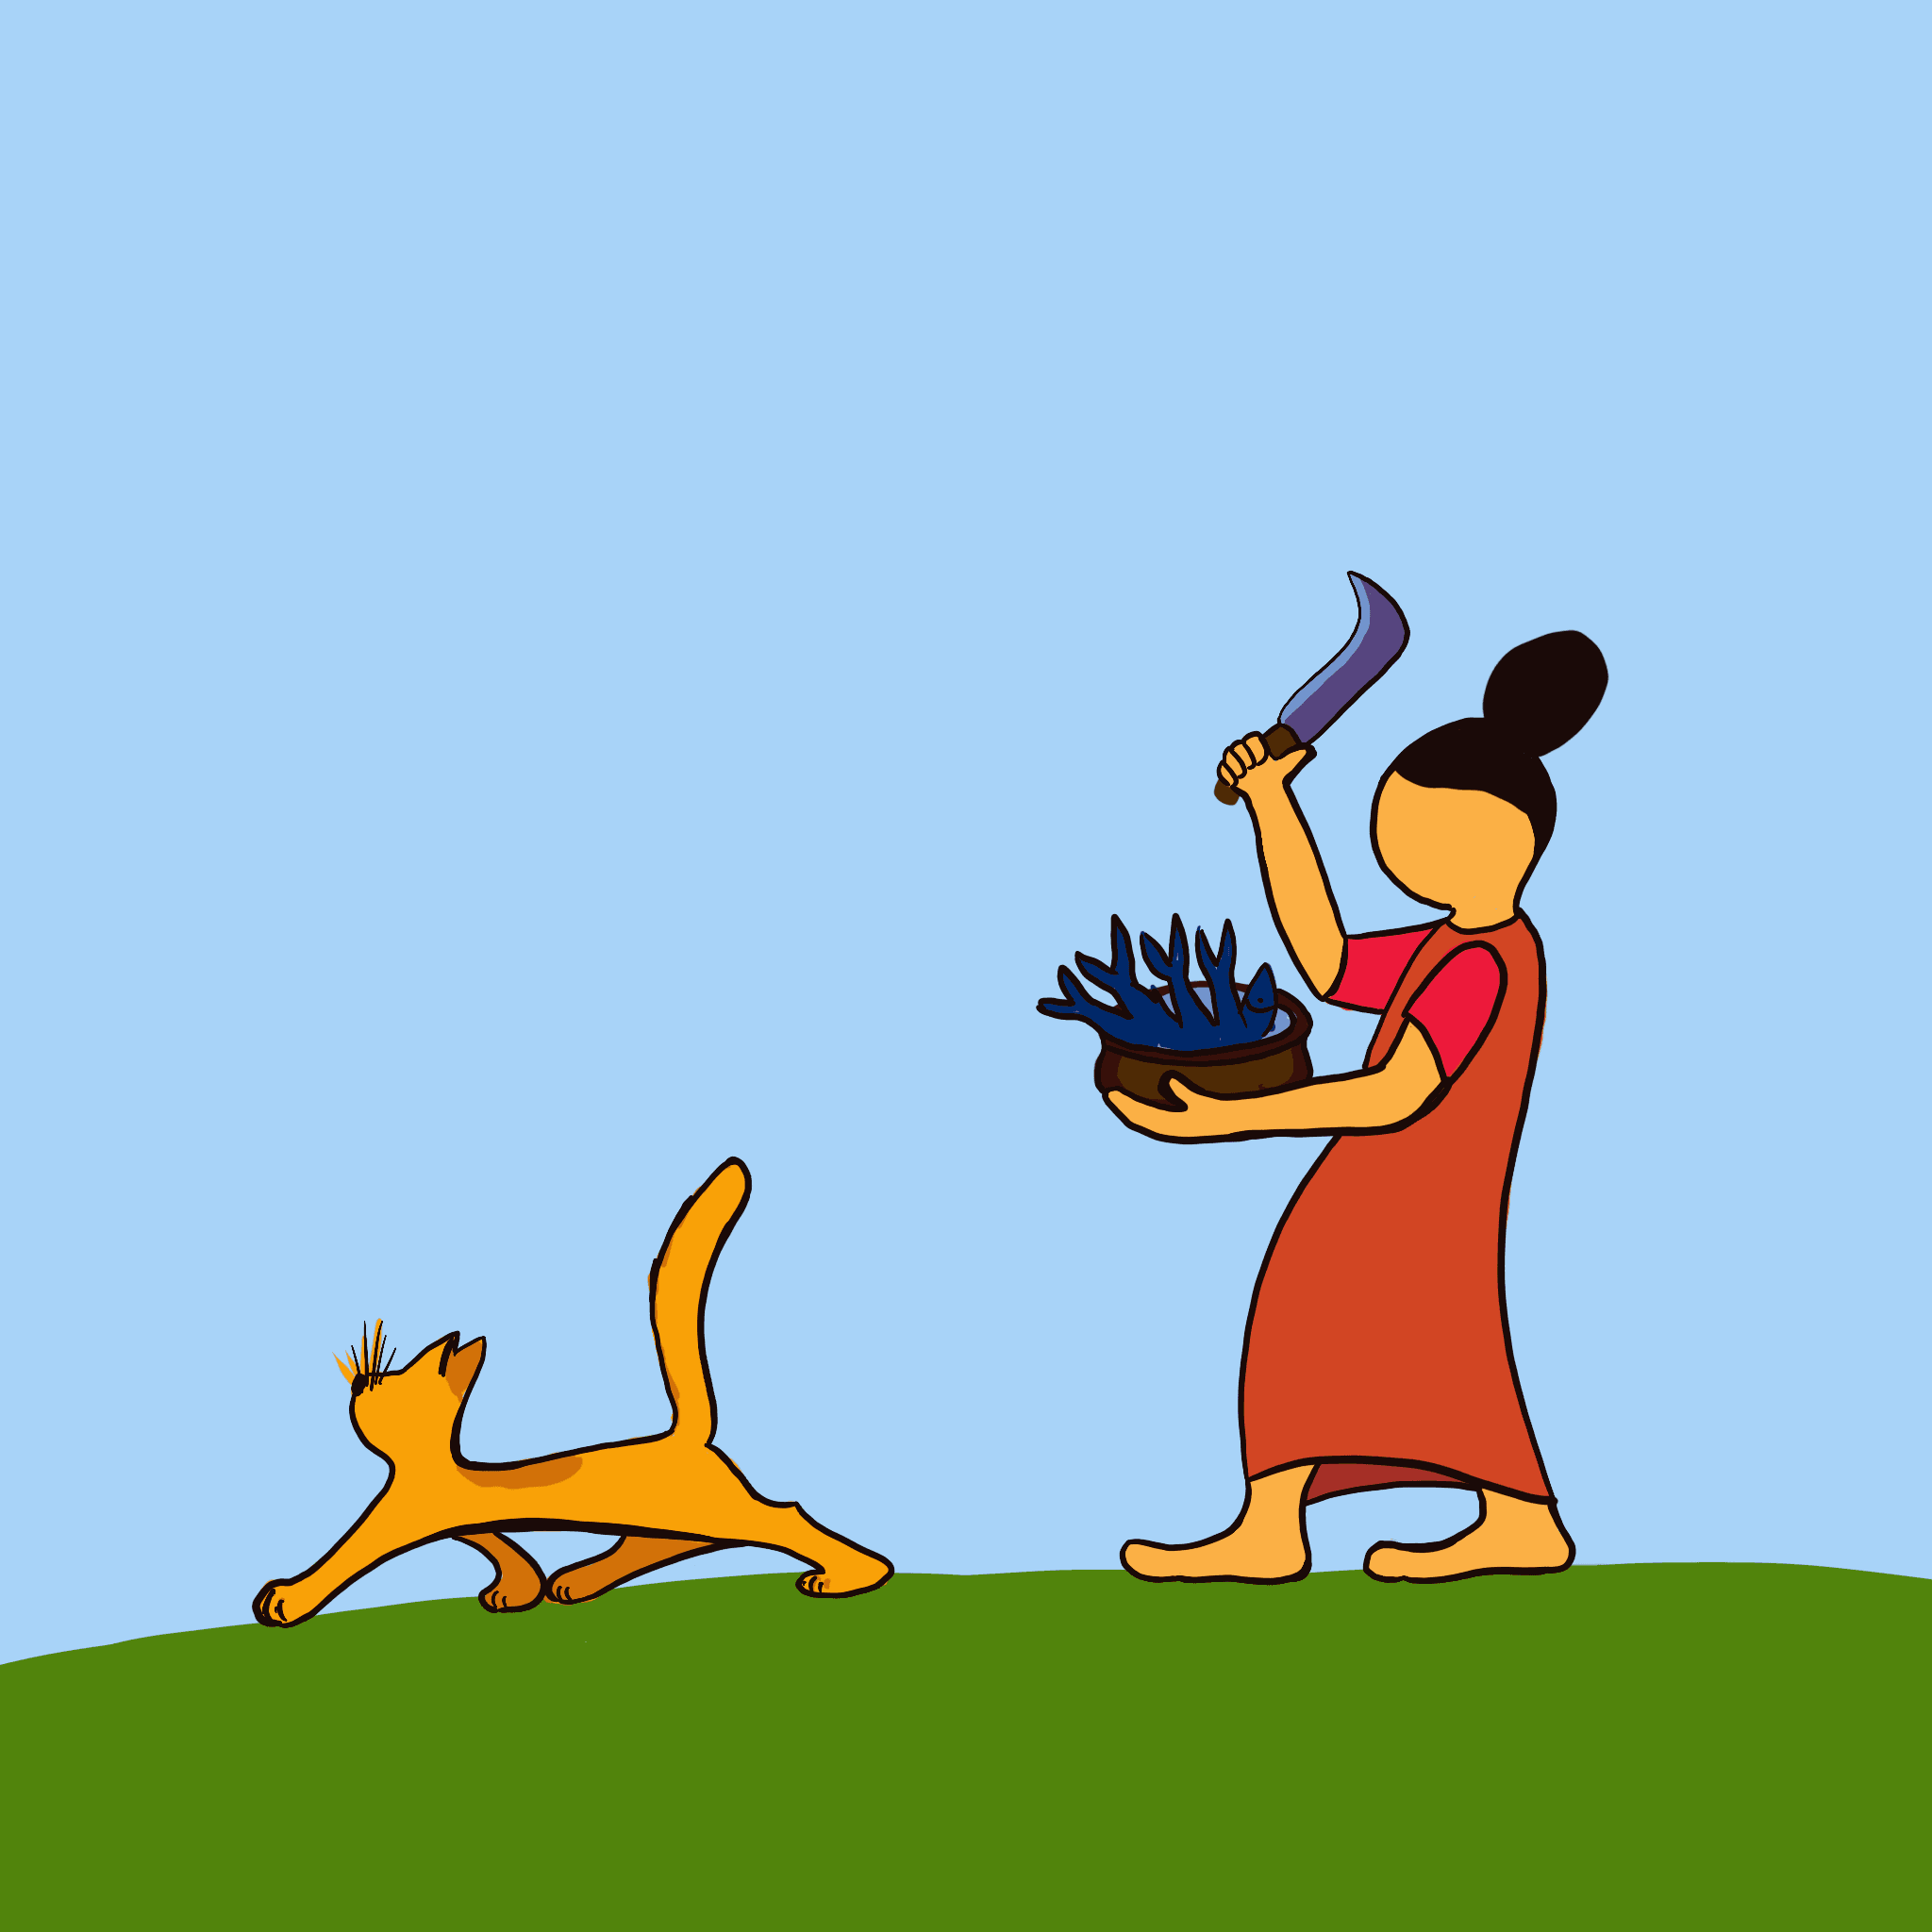 The woman and her cat